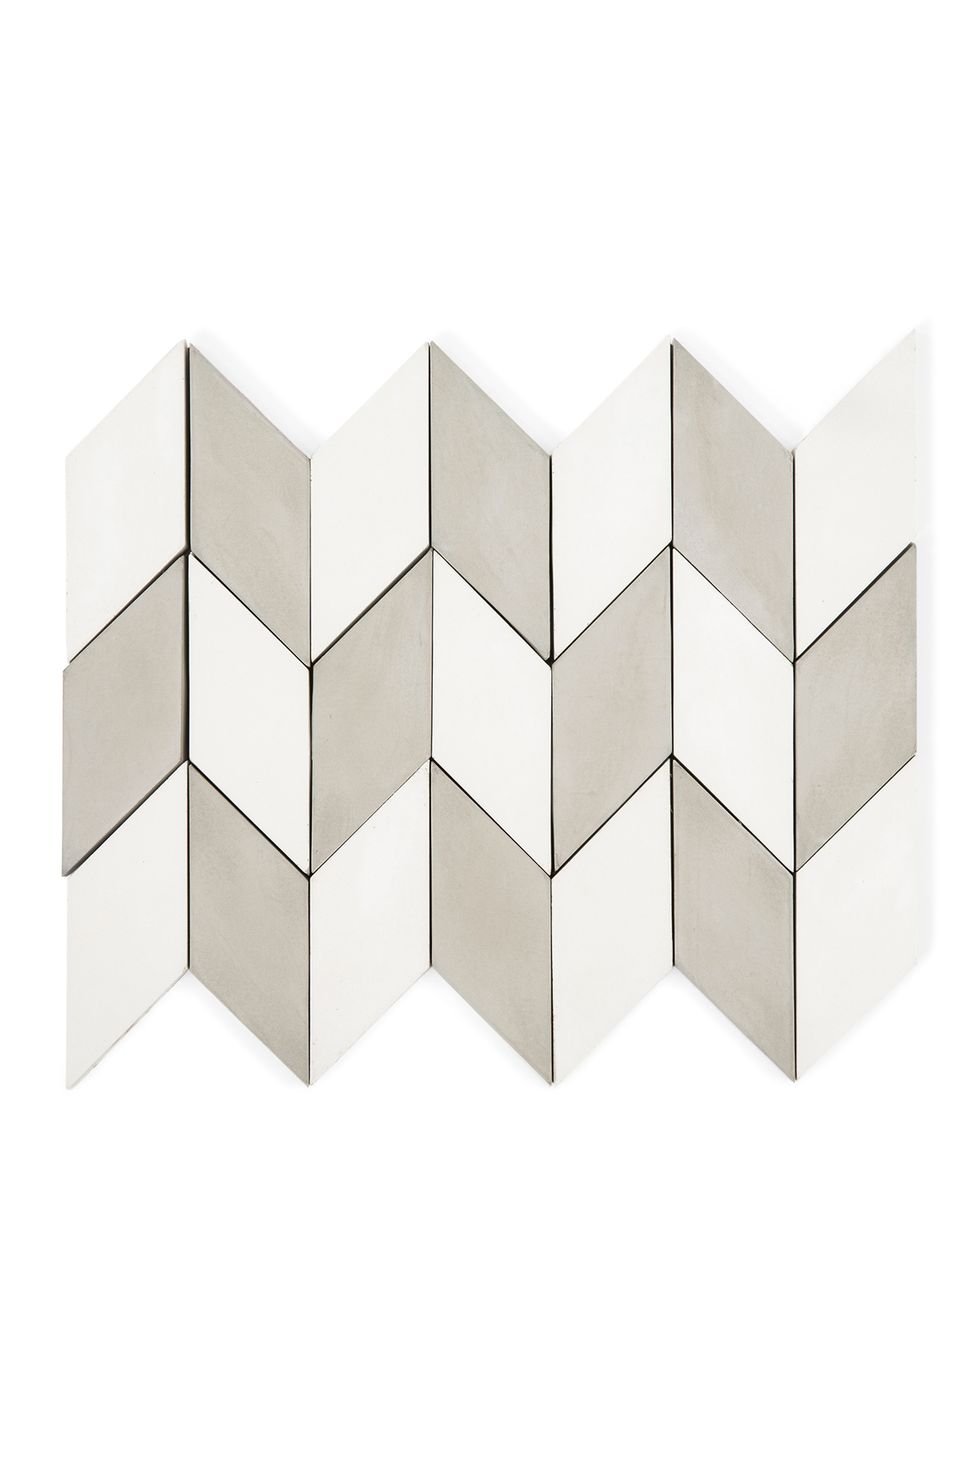 Rectangle, Beige, Parallel, Symmetry, Silver, Square, Drawing, 